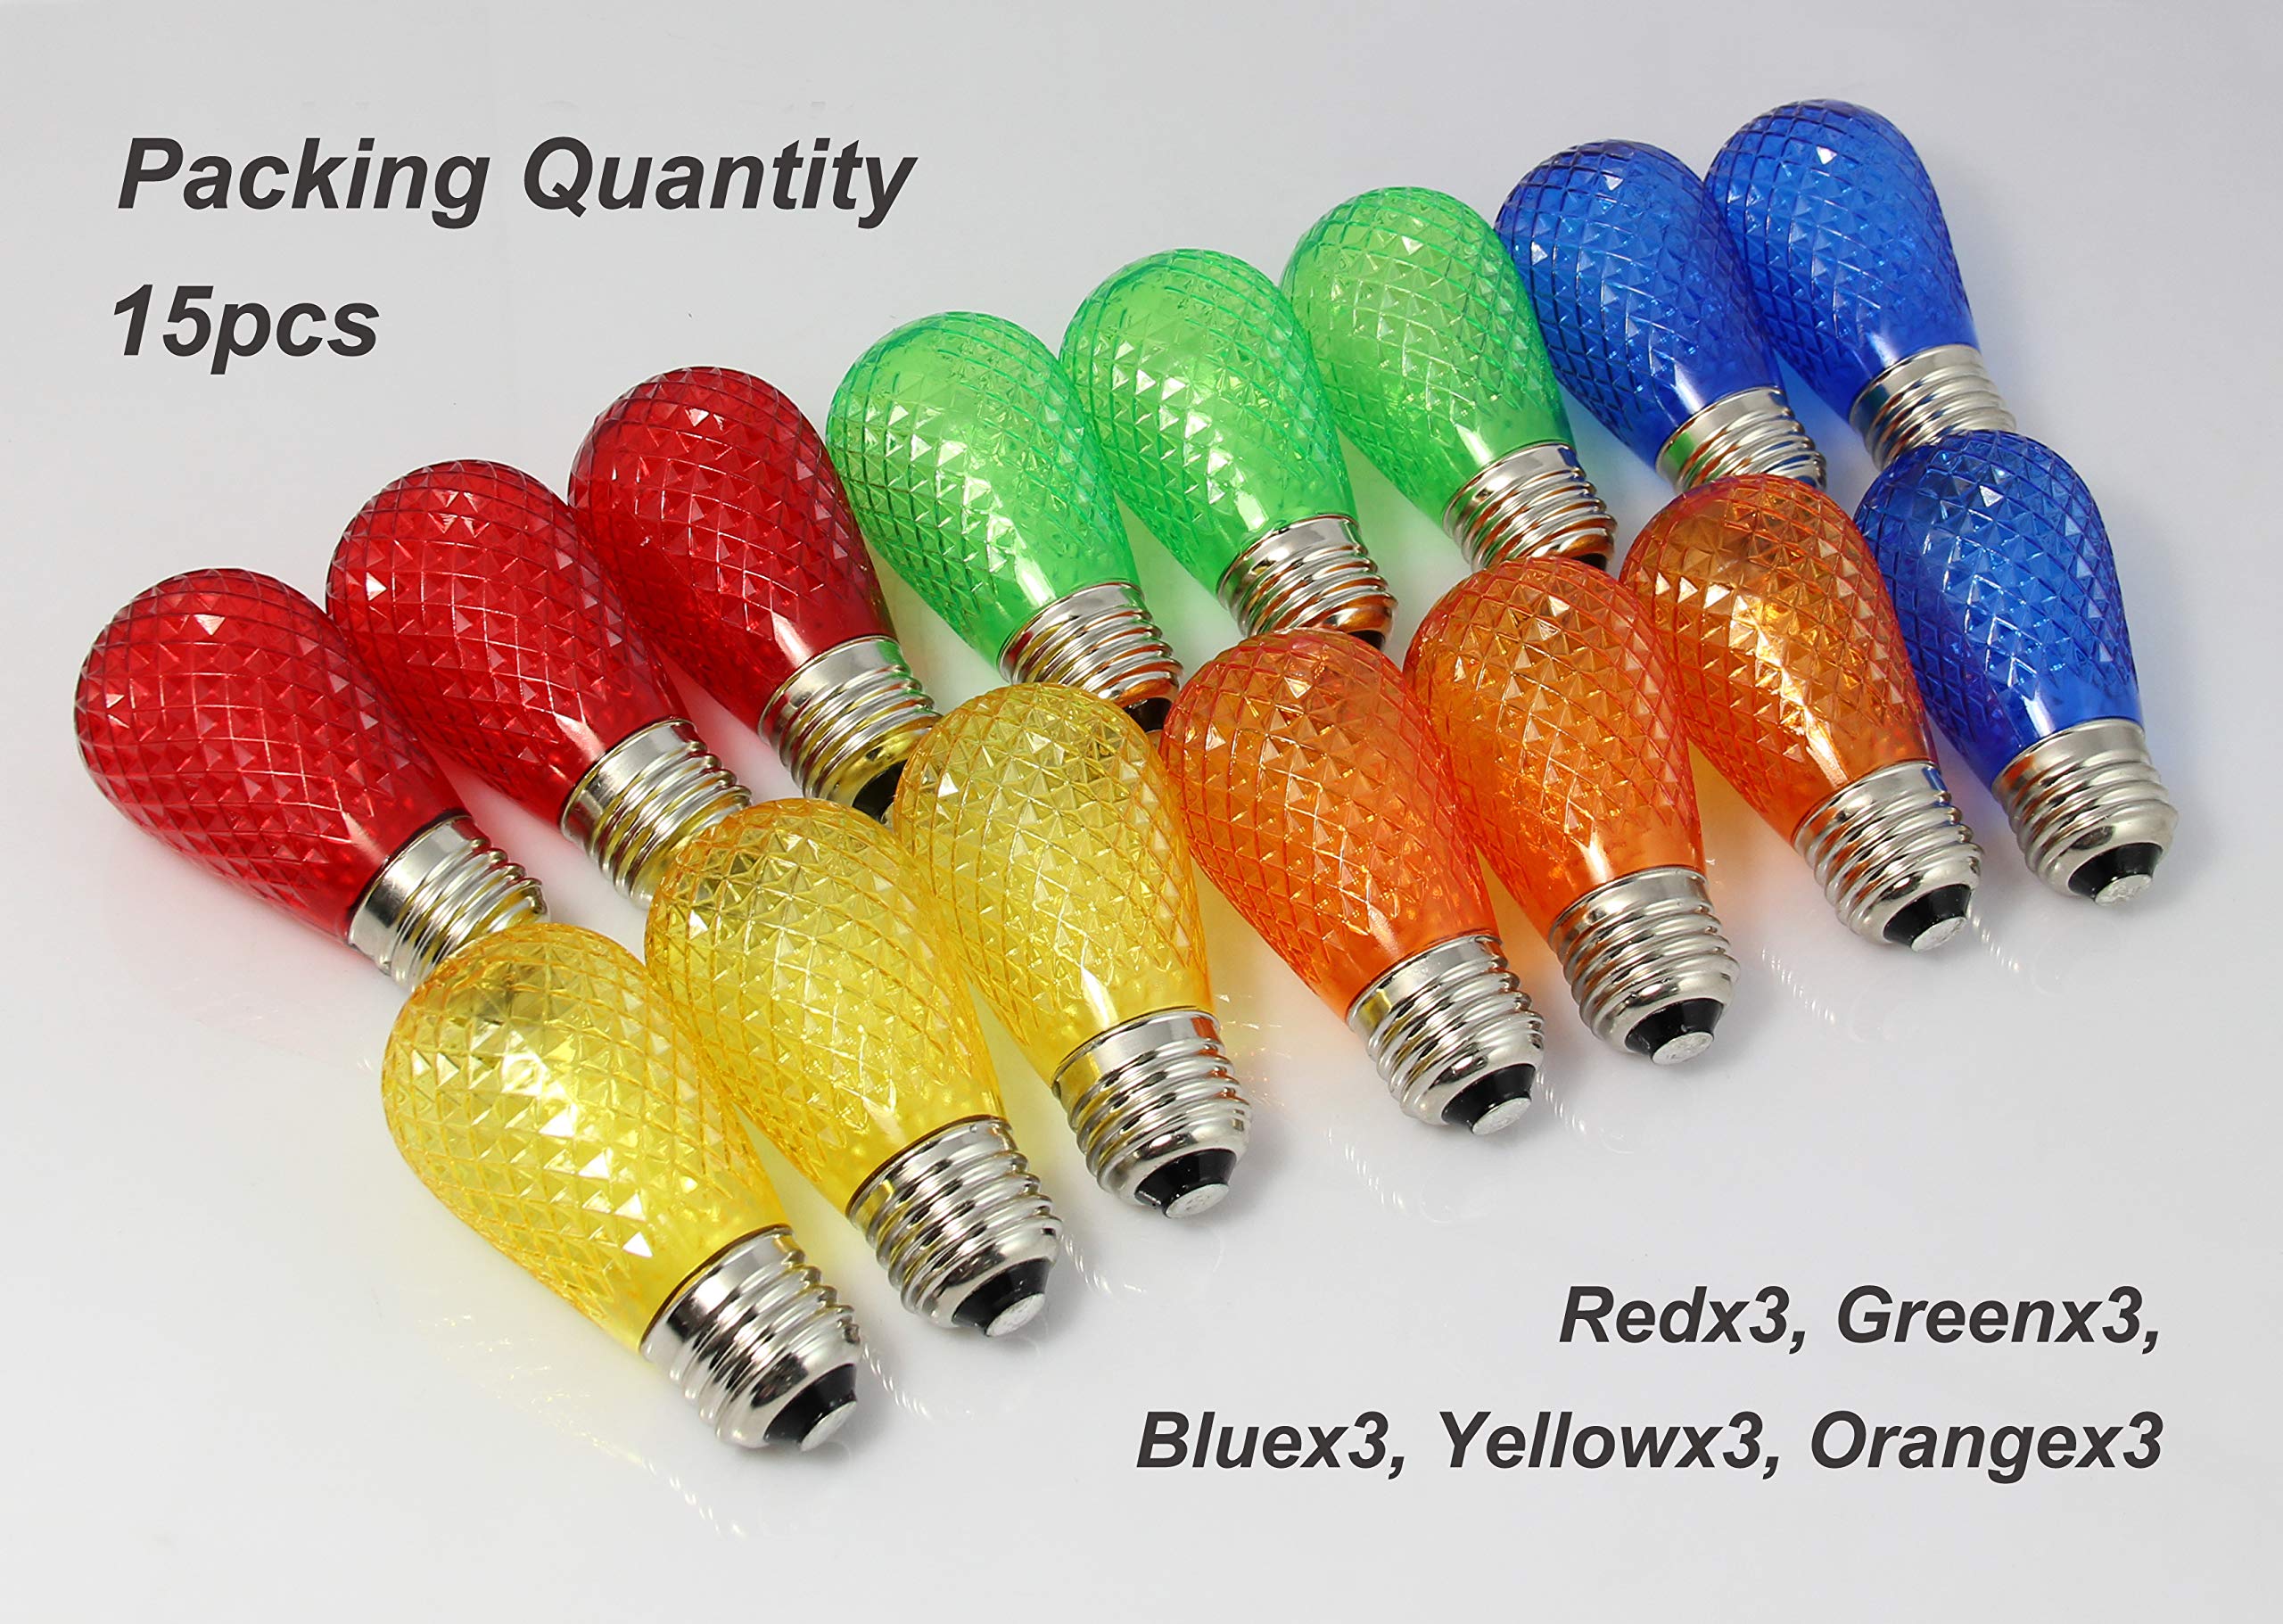 BRIMAX S14 Colored LED Bulbs Plastic for Christmas Outdoor String Lights Replacement, Shatterproof, E26 Base Multi Color Red/Orange/Blue/Green/Yellow, Halloween Decorative Bulb 15pack